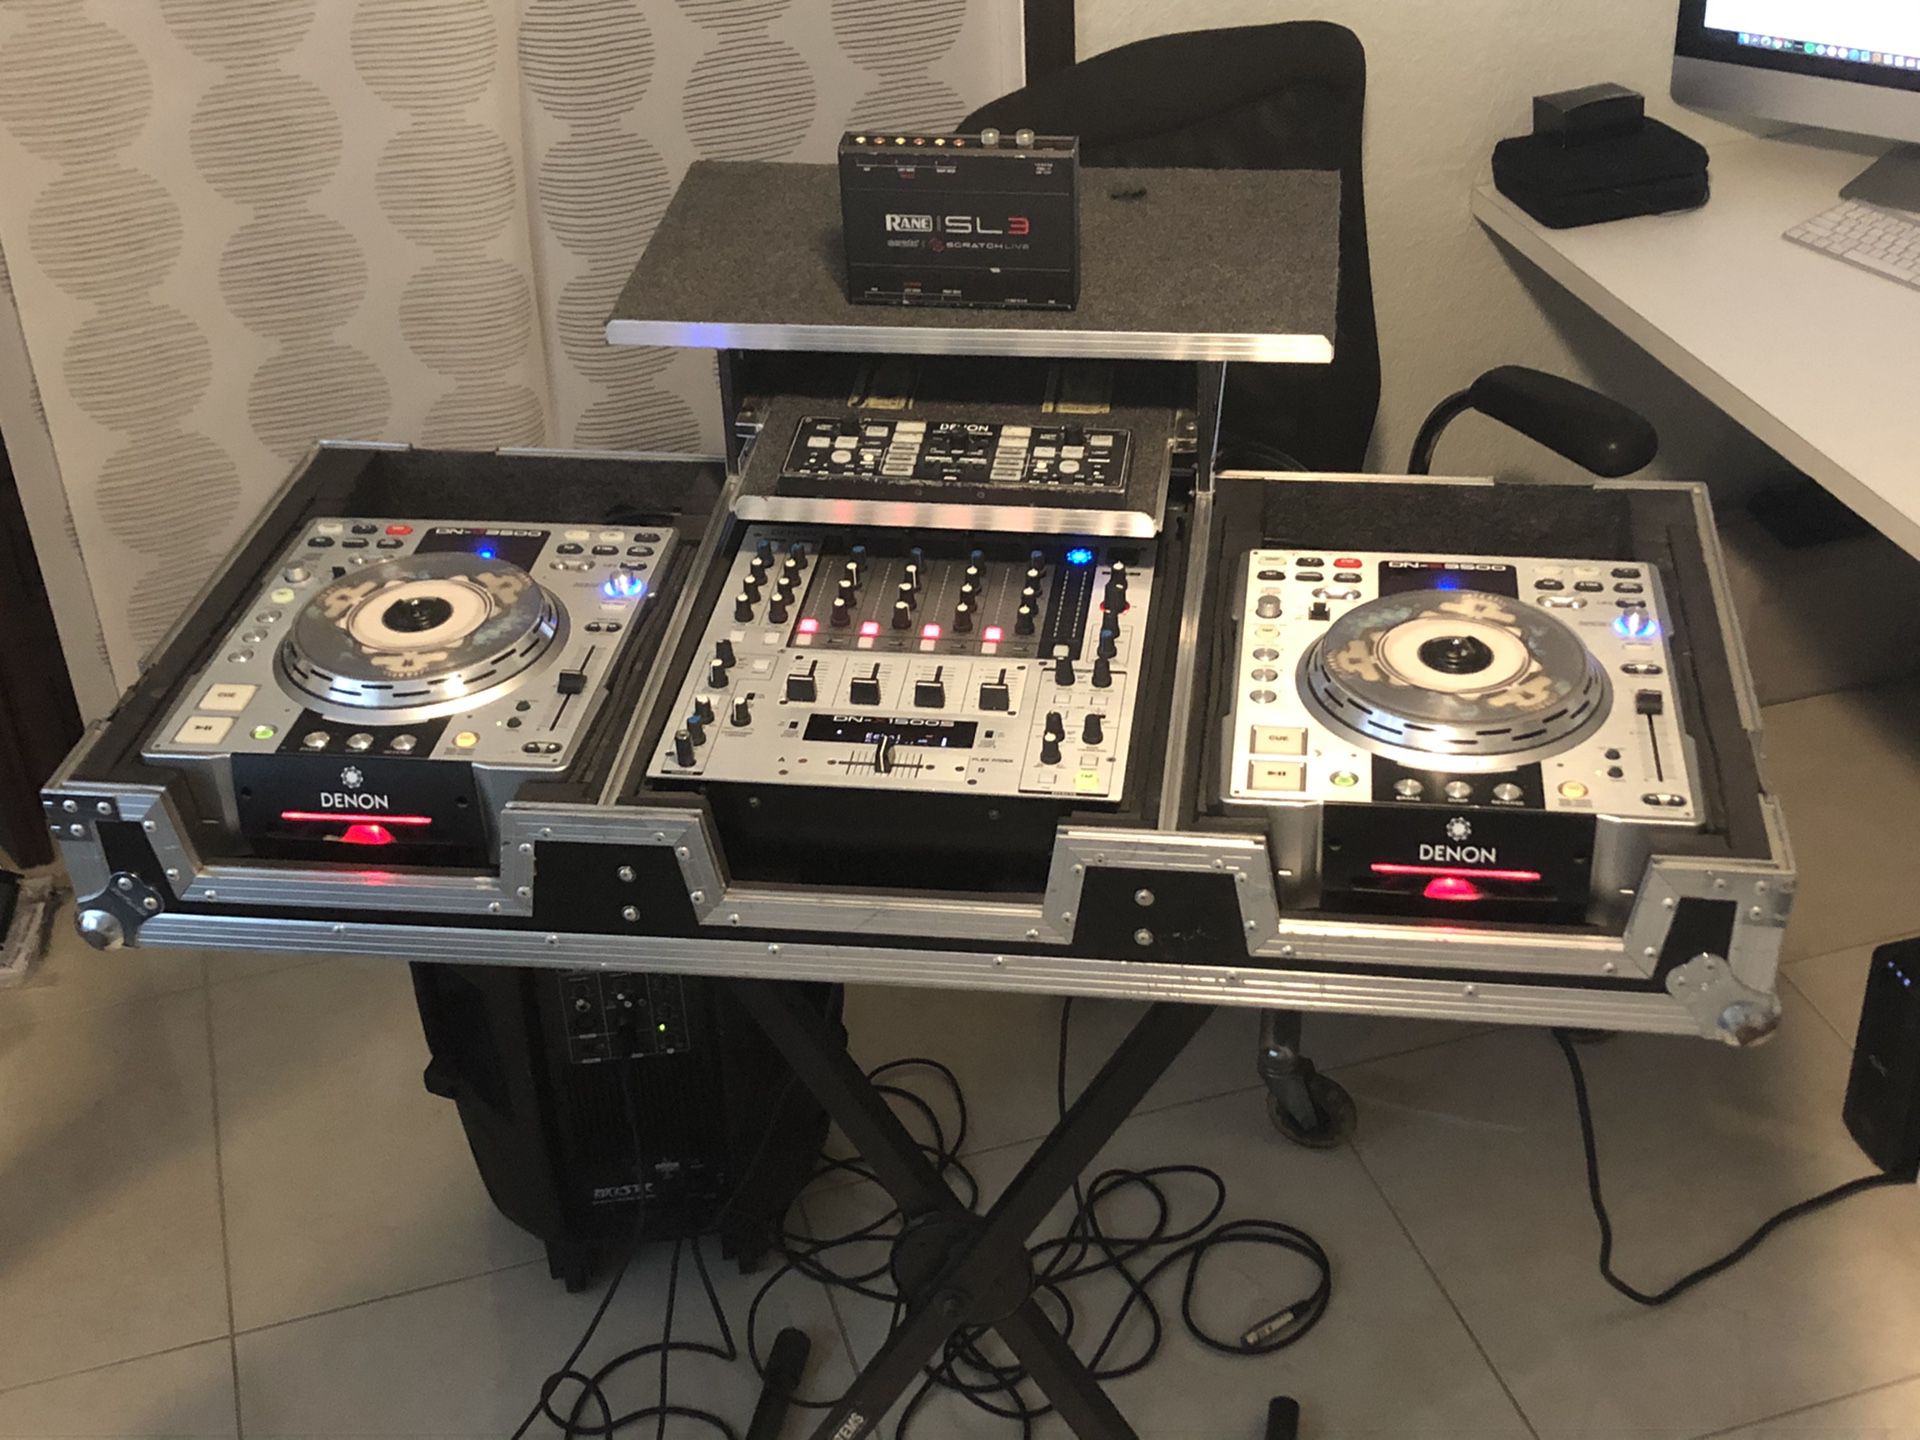 Dj equipment denon with stand everything pictured included except speaker